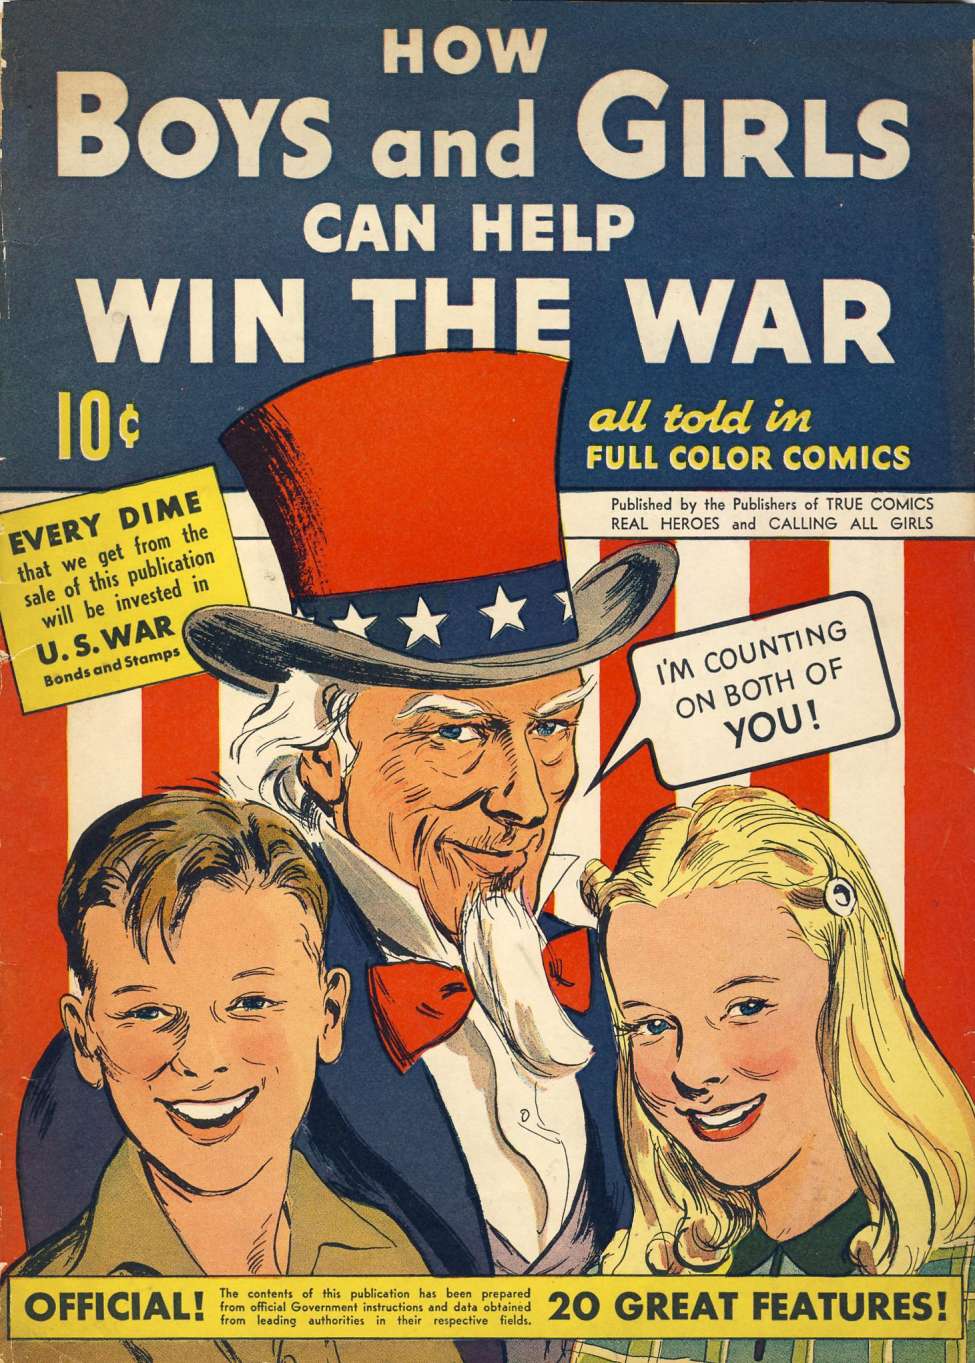 Book Cover For How Boys and Girls Can Help Win The War